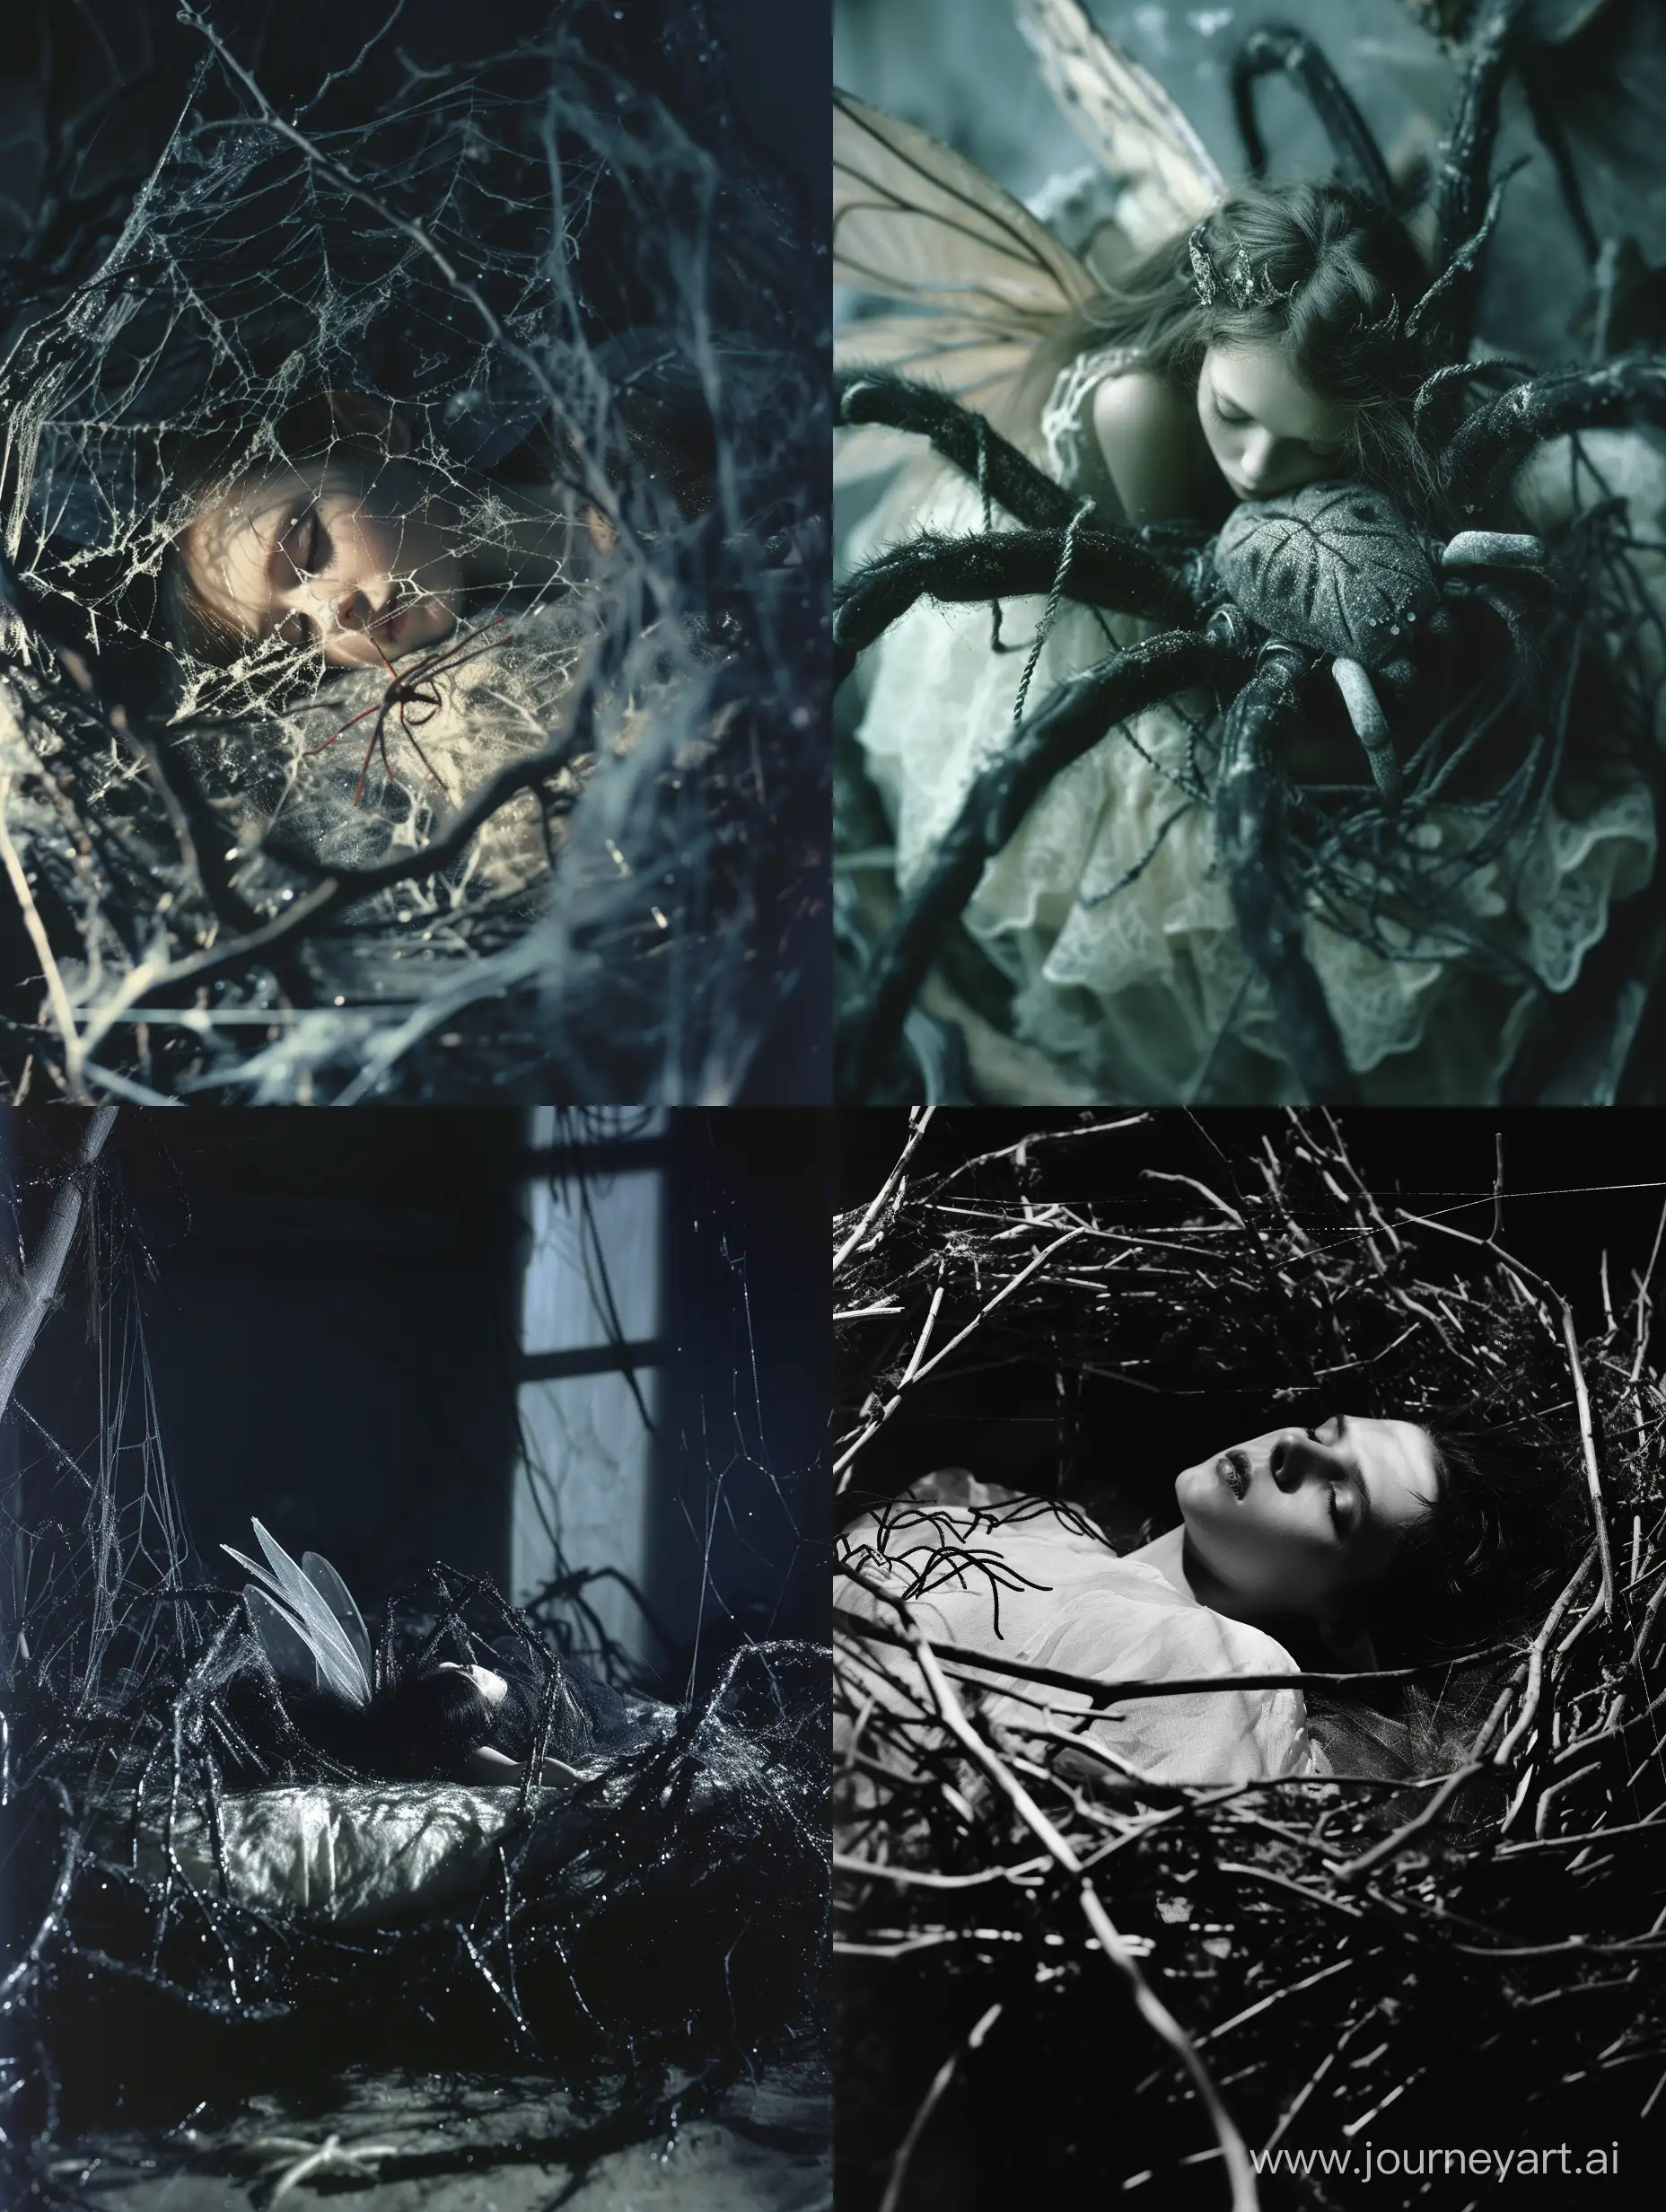 Eerie-Fairy-Ensnared-in-a-Spidery-Web-Dark-Aesthetic-Provocative-Image